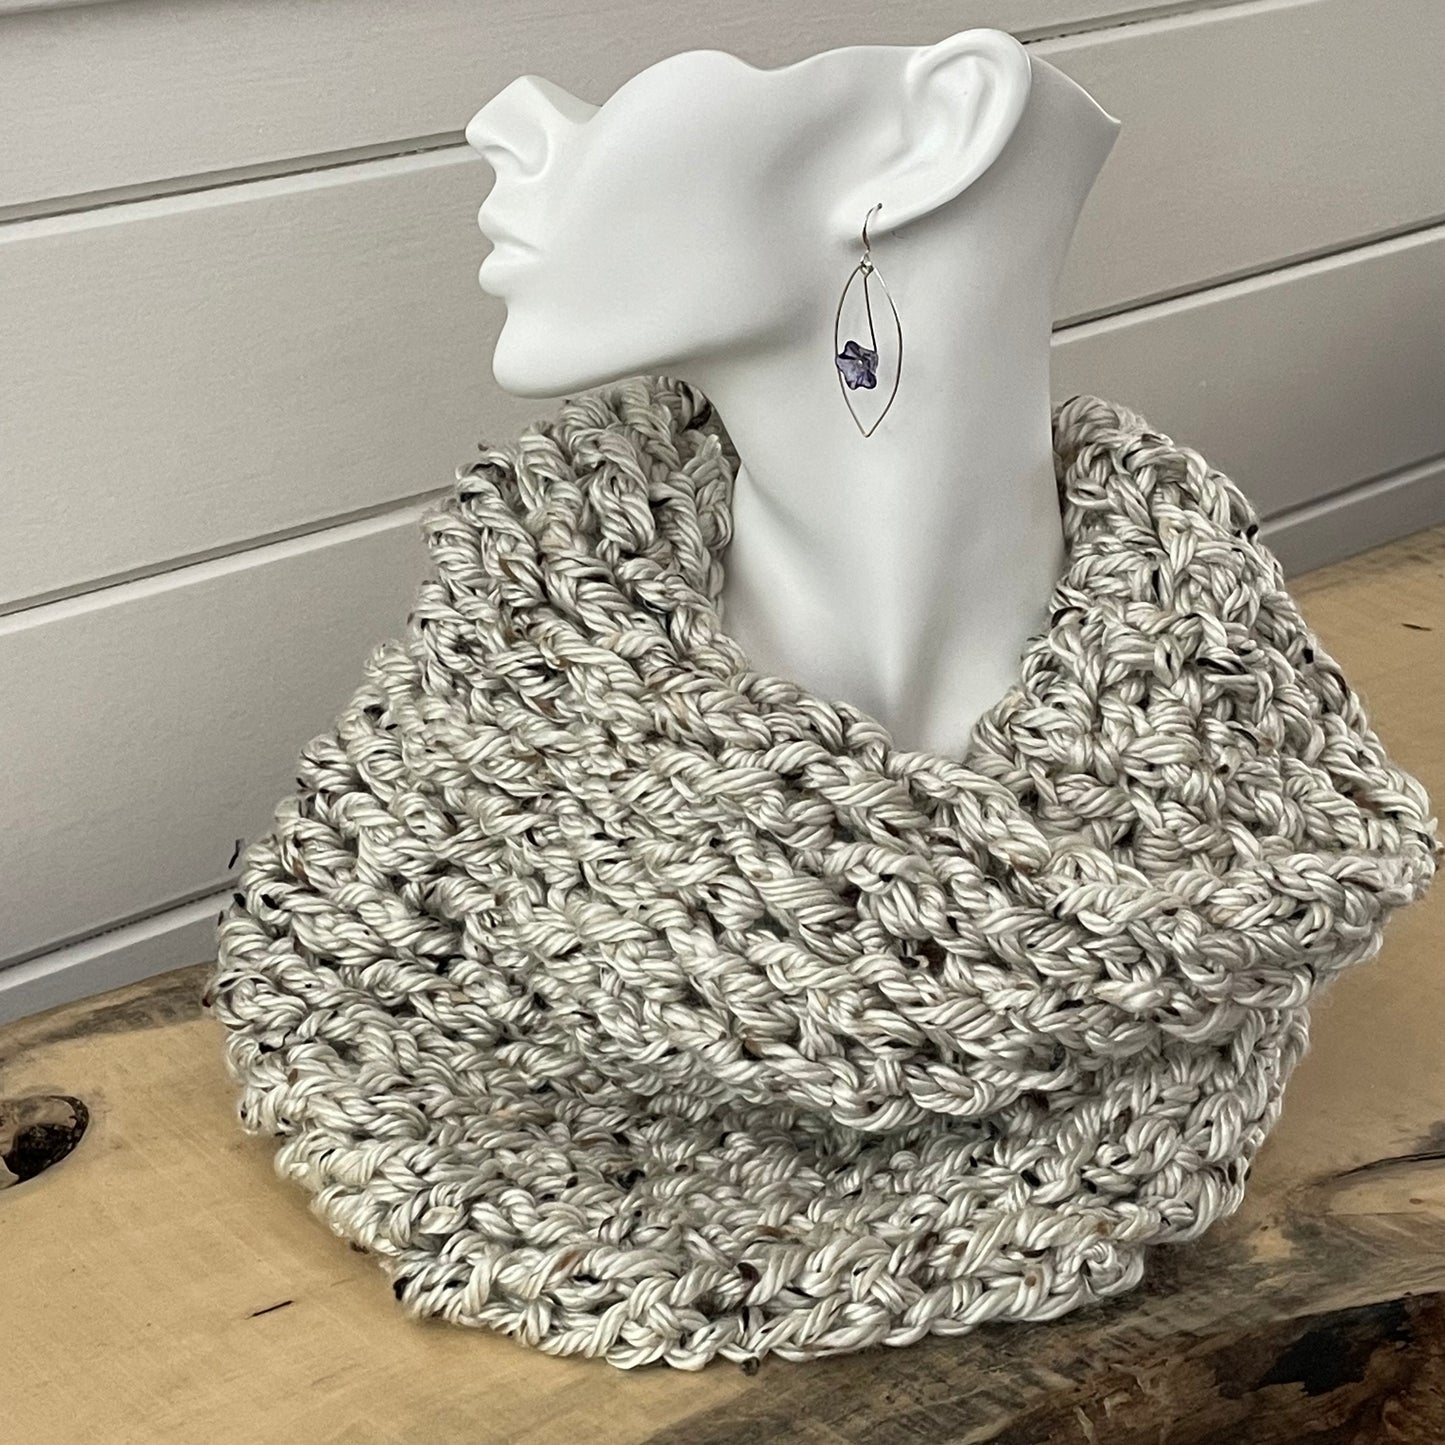 Extra Soft Marbled Wheat Chunky Cowl Infinity Scarf 13.5" Acrylic Rayon Blend Multicolor Hand Crochet Unisex Fall Winter displayed on a solid white bust 